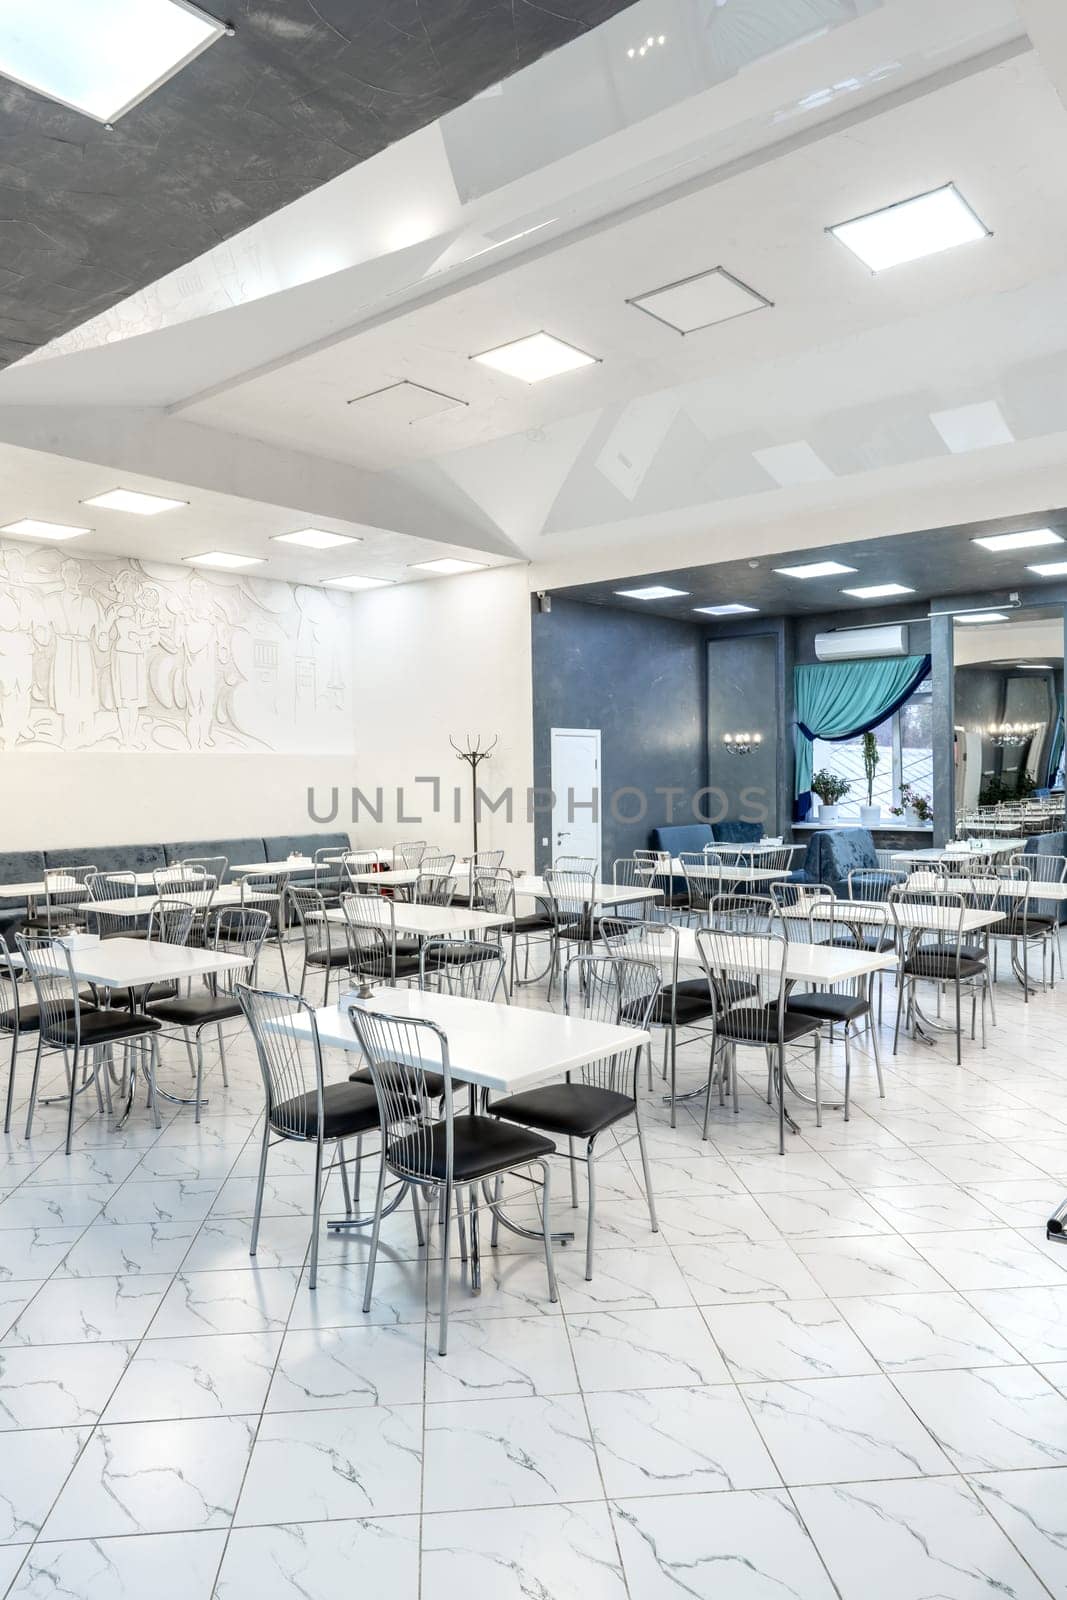 Interior of light colored canteen at the business center no people